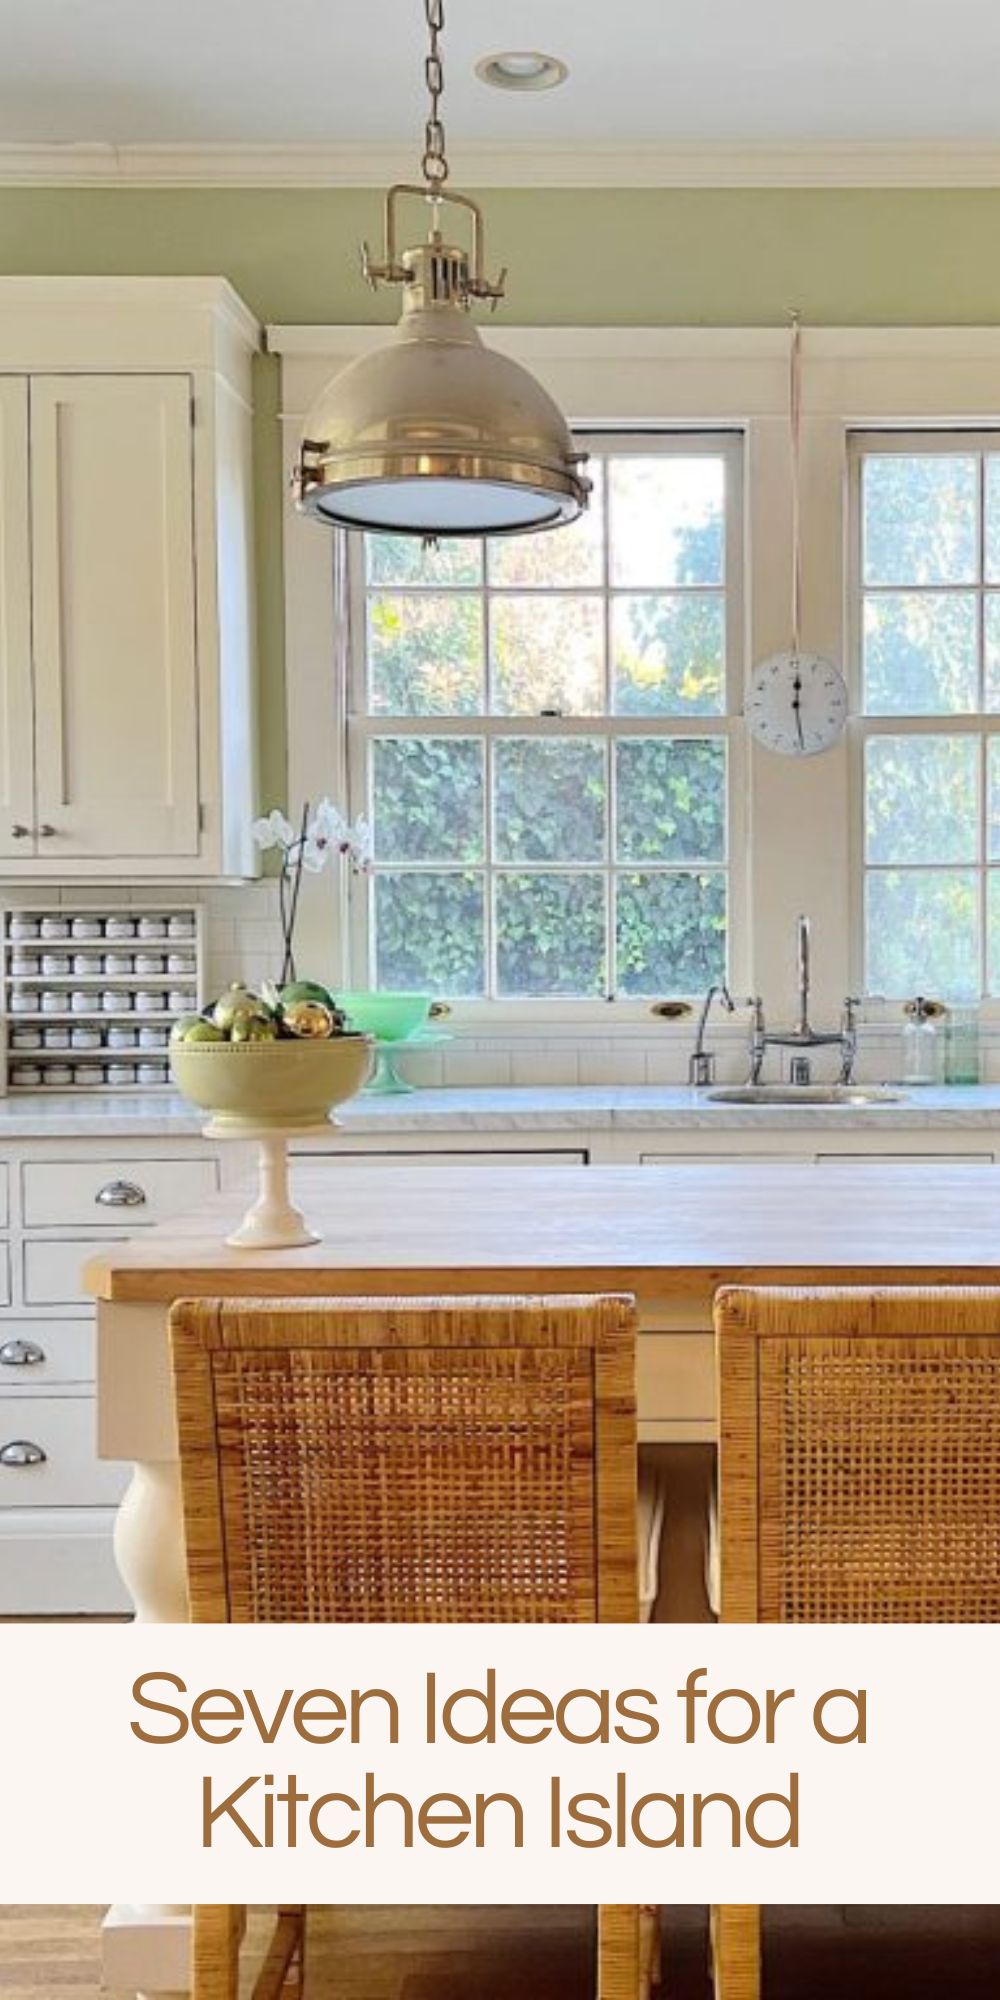 Kitchen Islands are not only practical, but they increase the value of your home. Today I am sharing my white kitchen islands and seven ideas for yours.